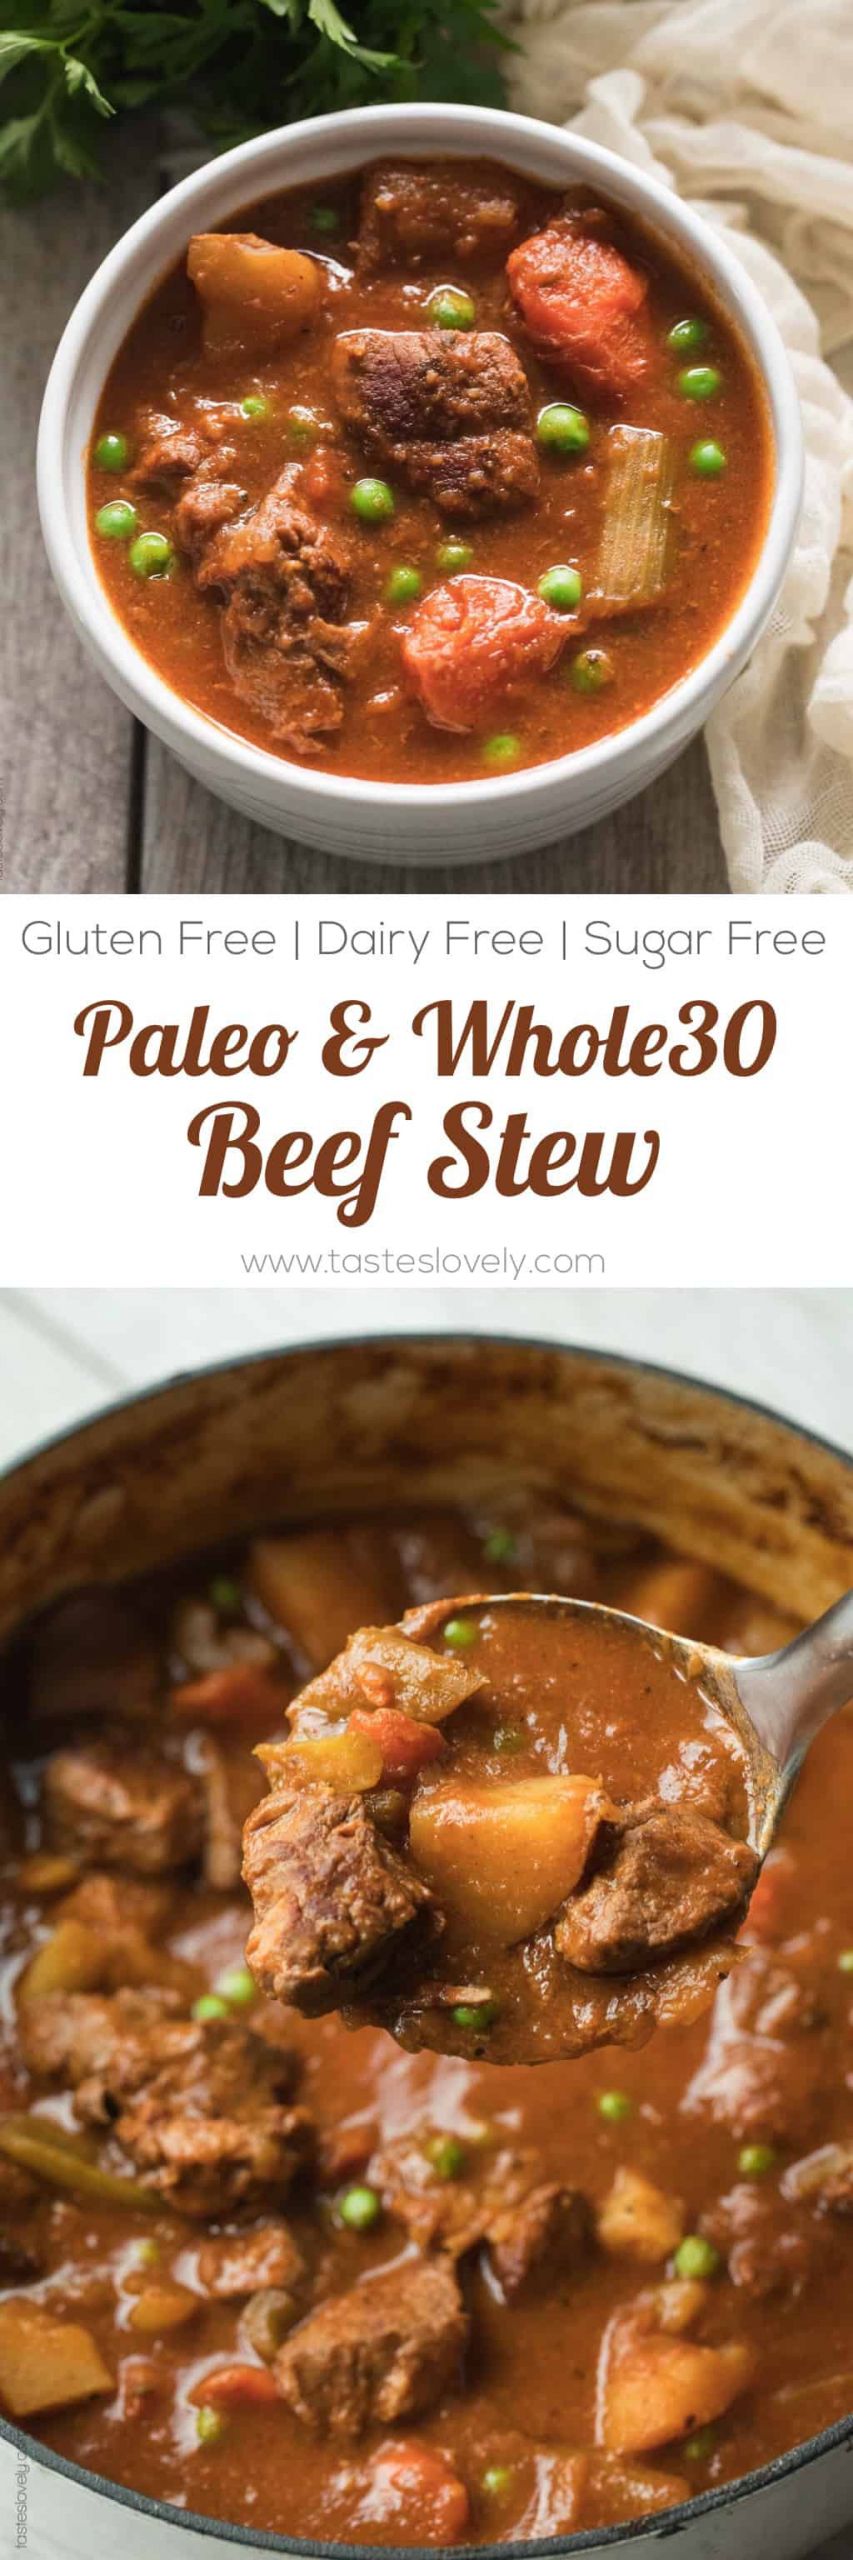 Paleo Beef Stew Recipe
 Paleo & Whole30 Beef Stew Slow Cooker or Dutch Oven